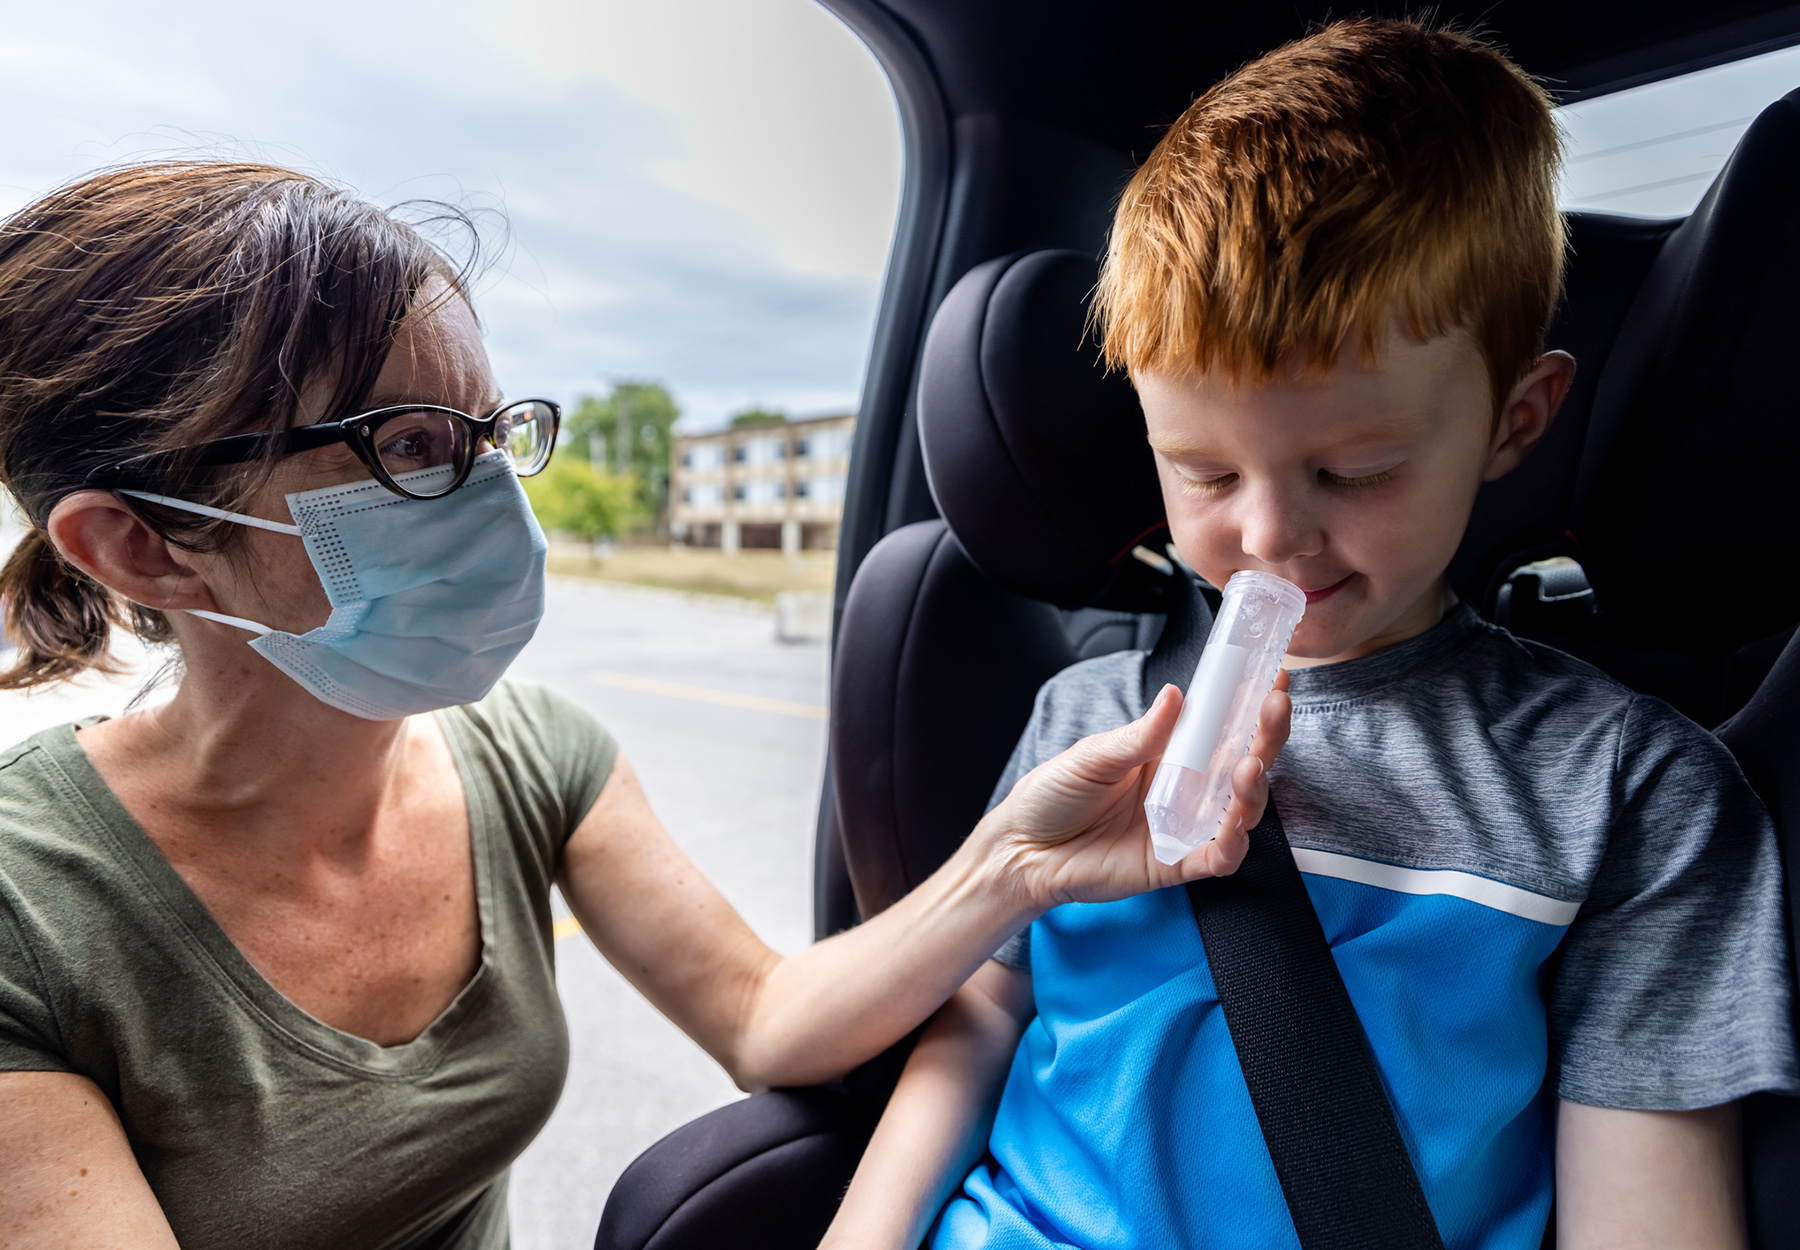 A mother, a nurse or a doctor is doing a Covid-19 saliva test on a cute redhead boy in his car. The women is wearing a surgical mask to protect herself from the spread of this infectious disease. The child is spiting in a plastic container, diagnostic medical tool. The saliva will then be analyzed in a laboratory for the coronavirus.